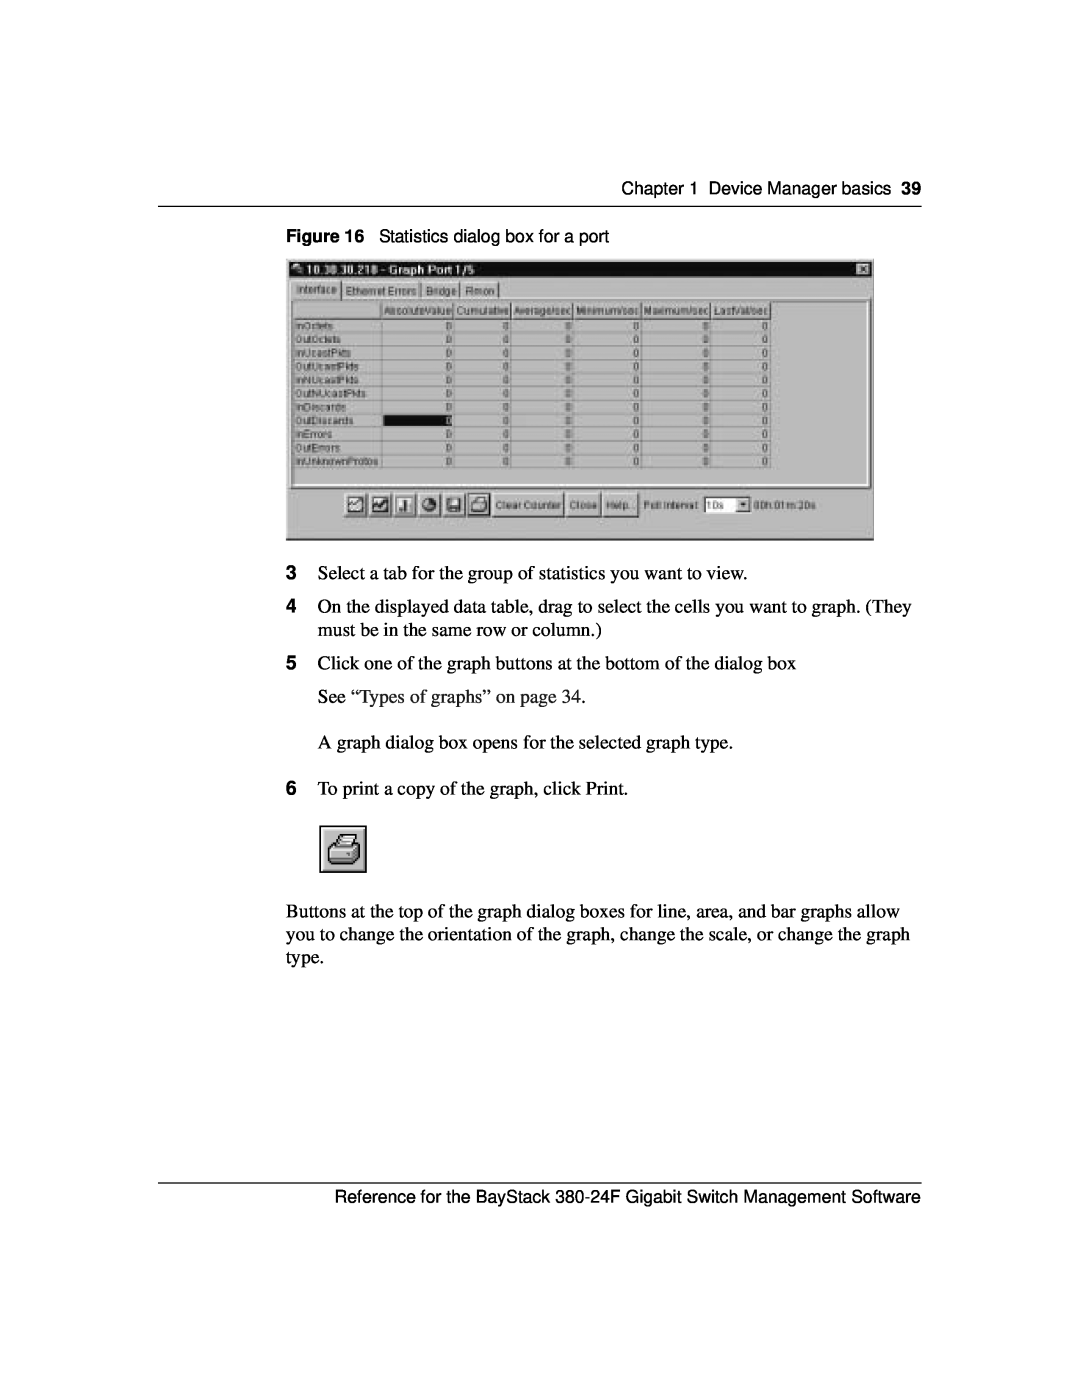 Nortel Networks 214393-A manual 6To print a copy of the graph, click Print 